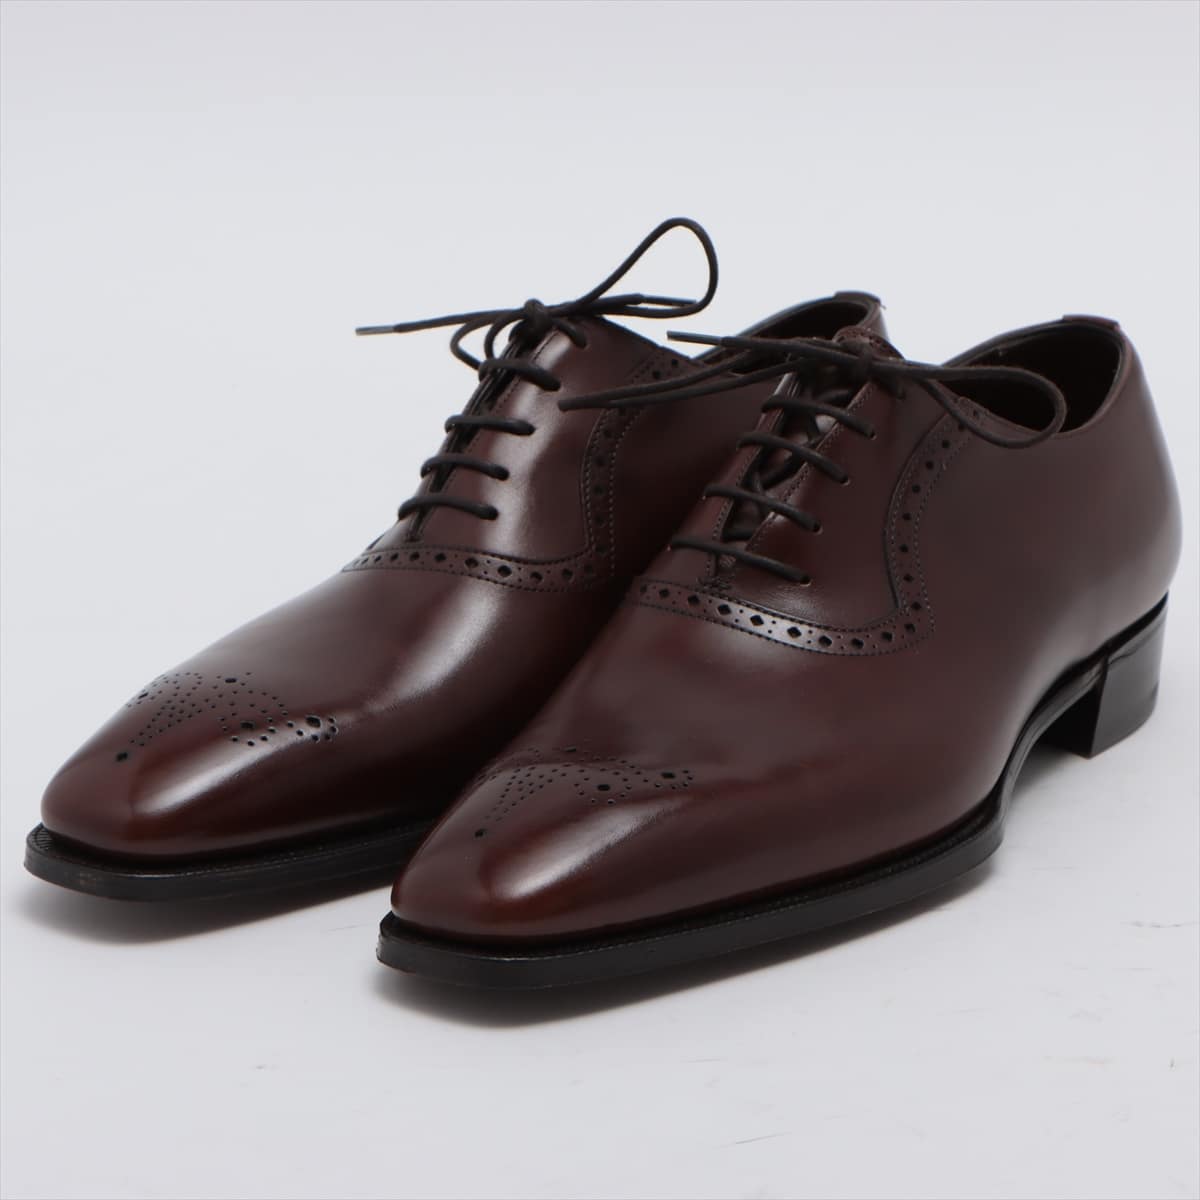 Gagiano & Girling Leather Dress shoes 8 1/2E Men's Brown HAYES Last TG73 With genuine shoe tree